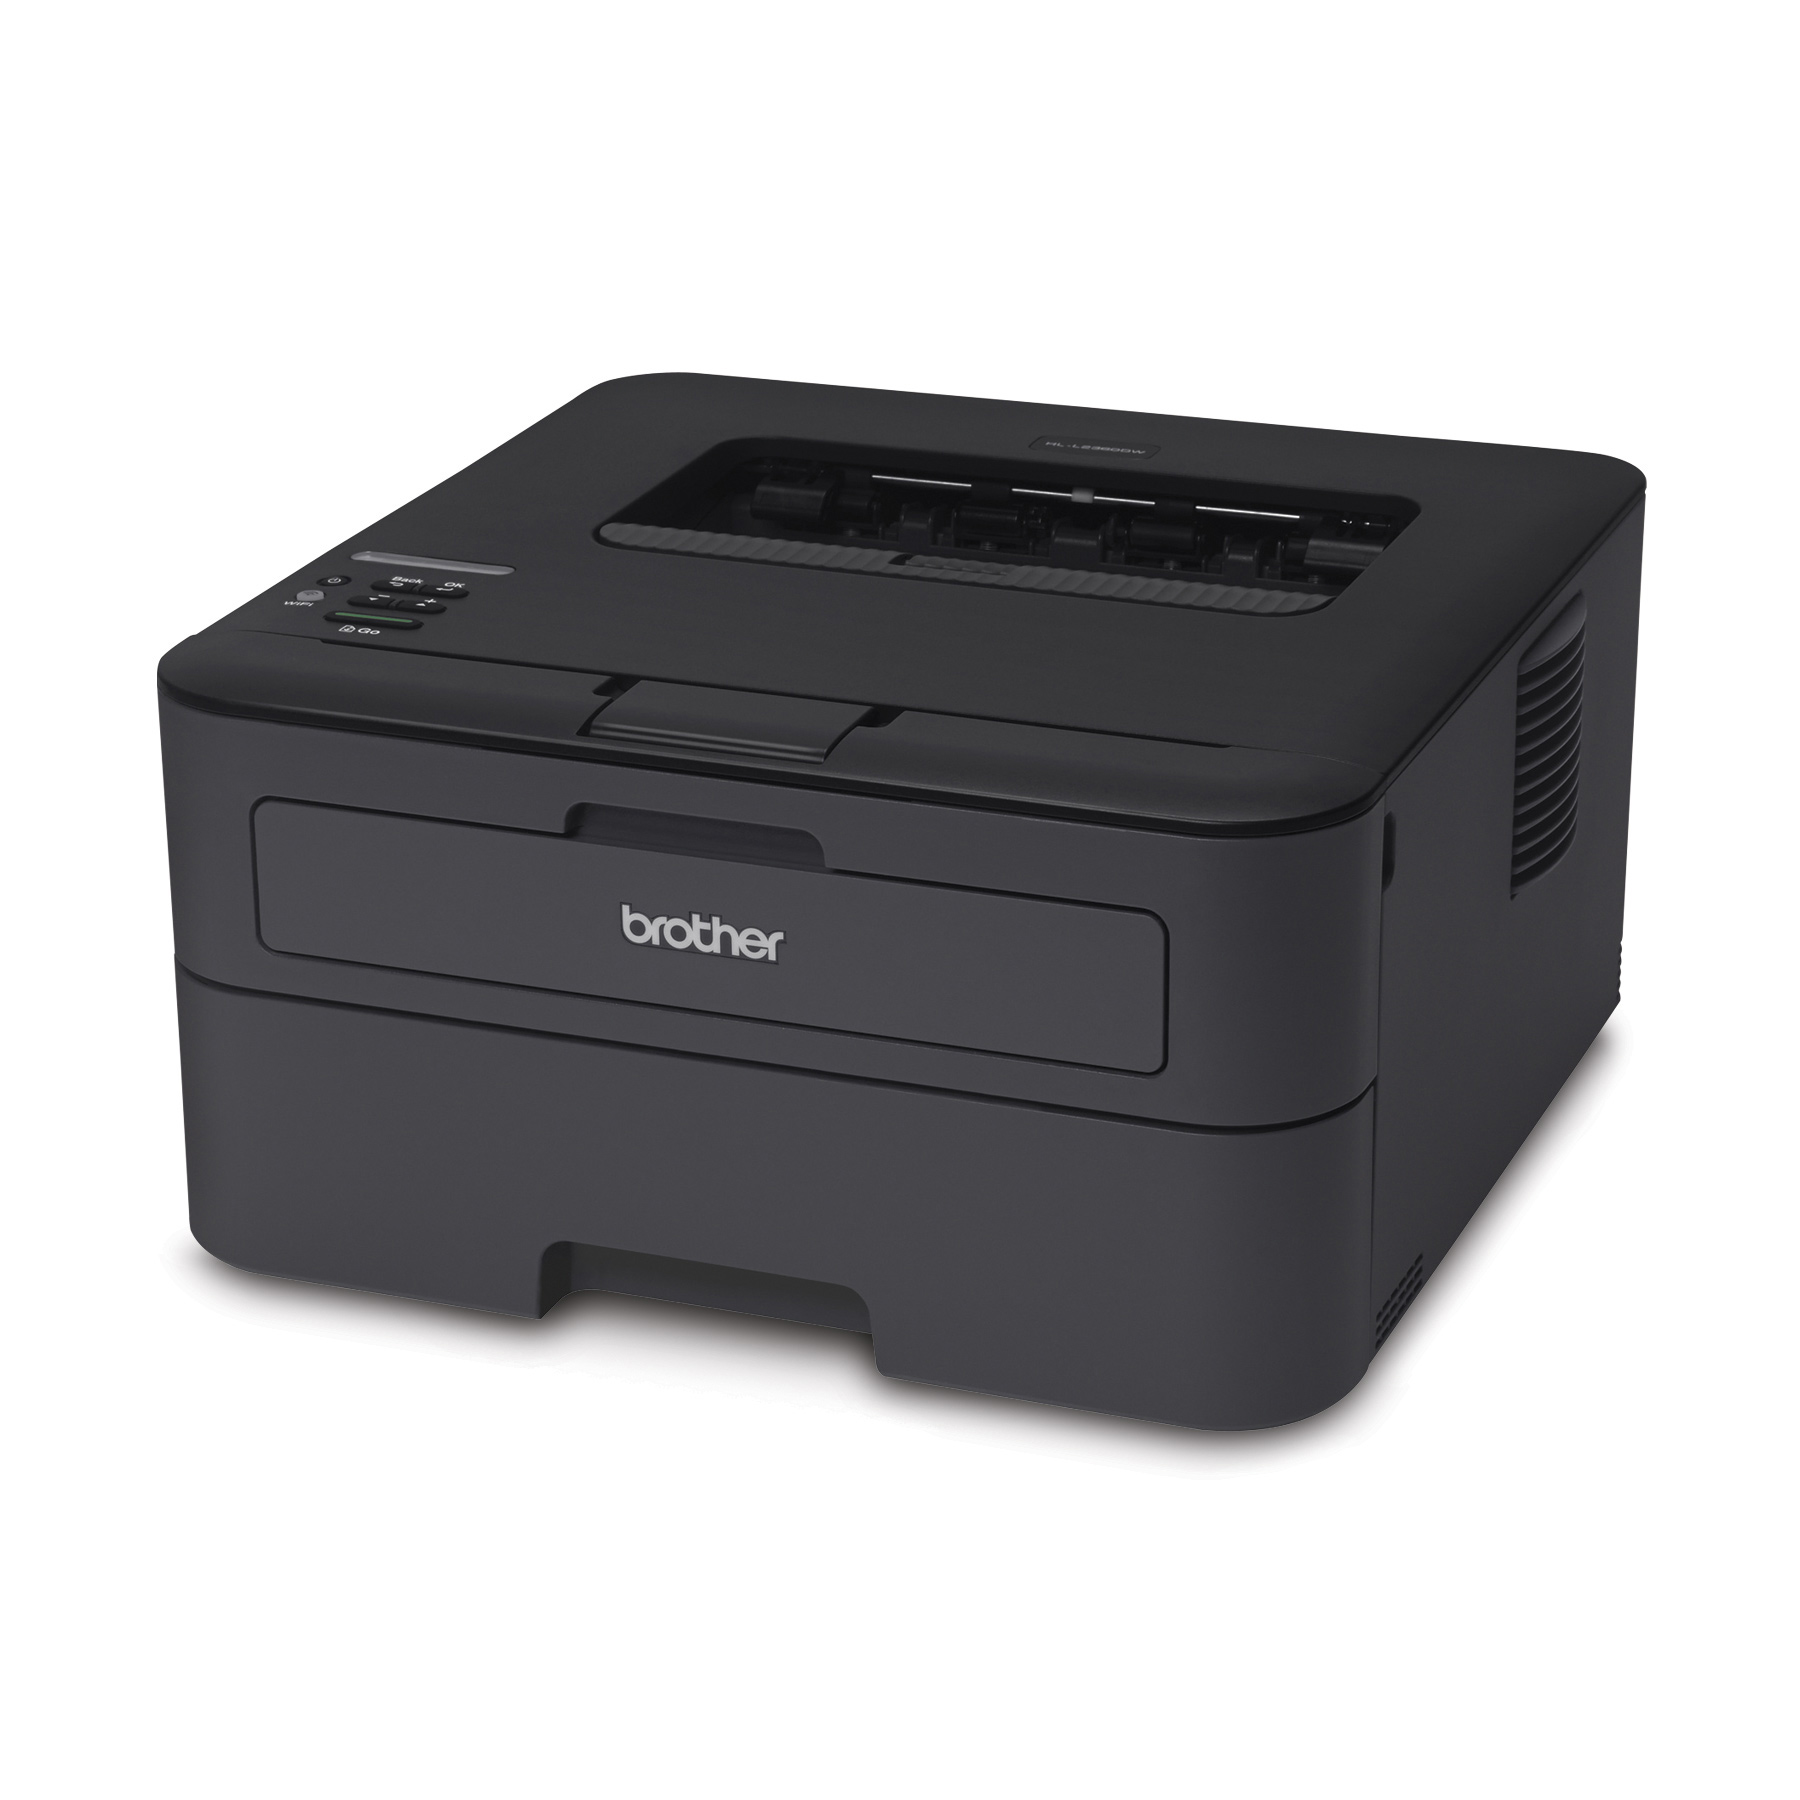 Image of Brother HL-L2360DW Compact Monochrome Laser Printer